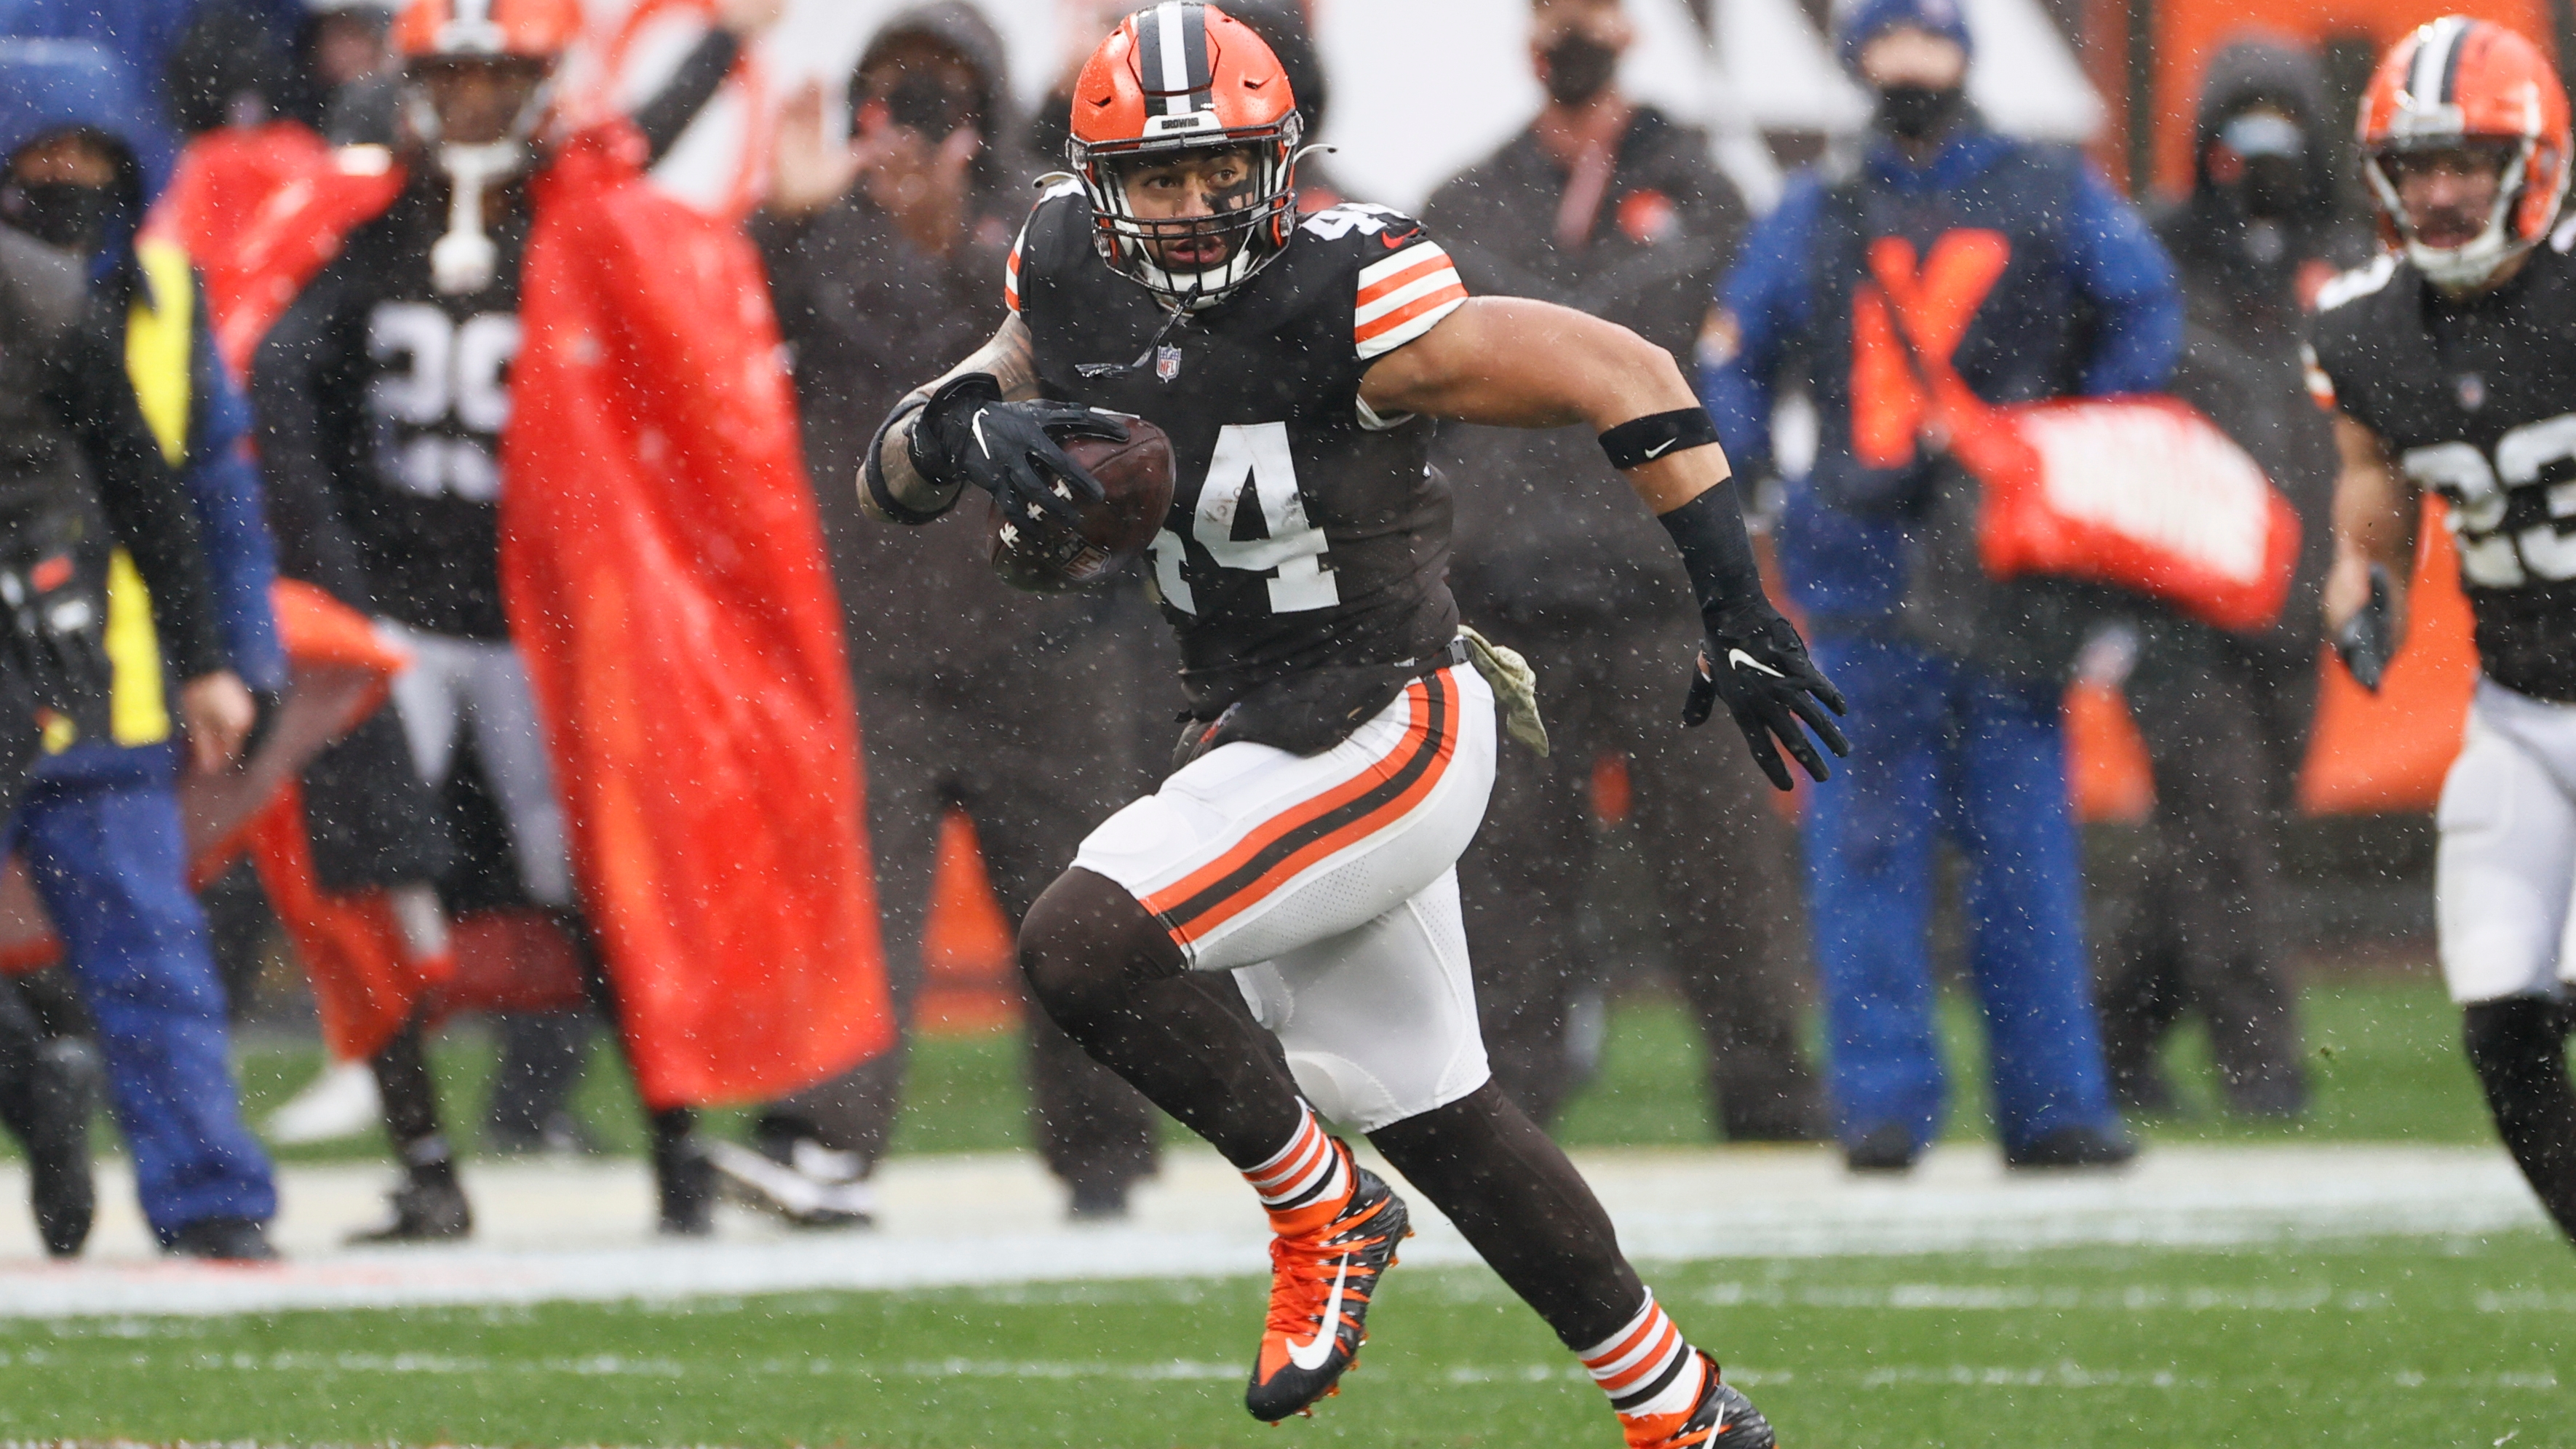 Former BYU linebacker Sione Takitaki scores on 50-yard pick-six for Browns